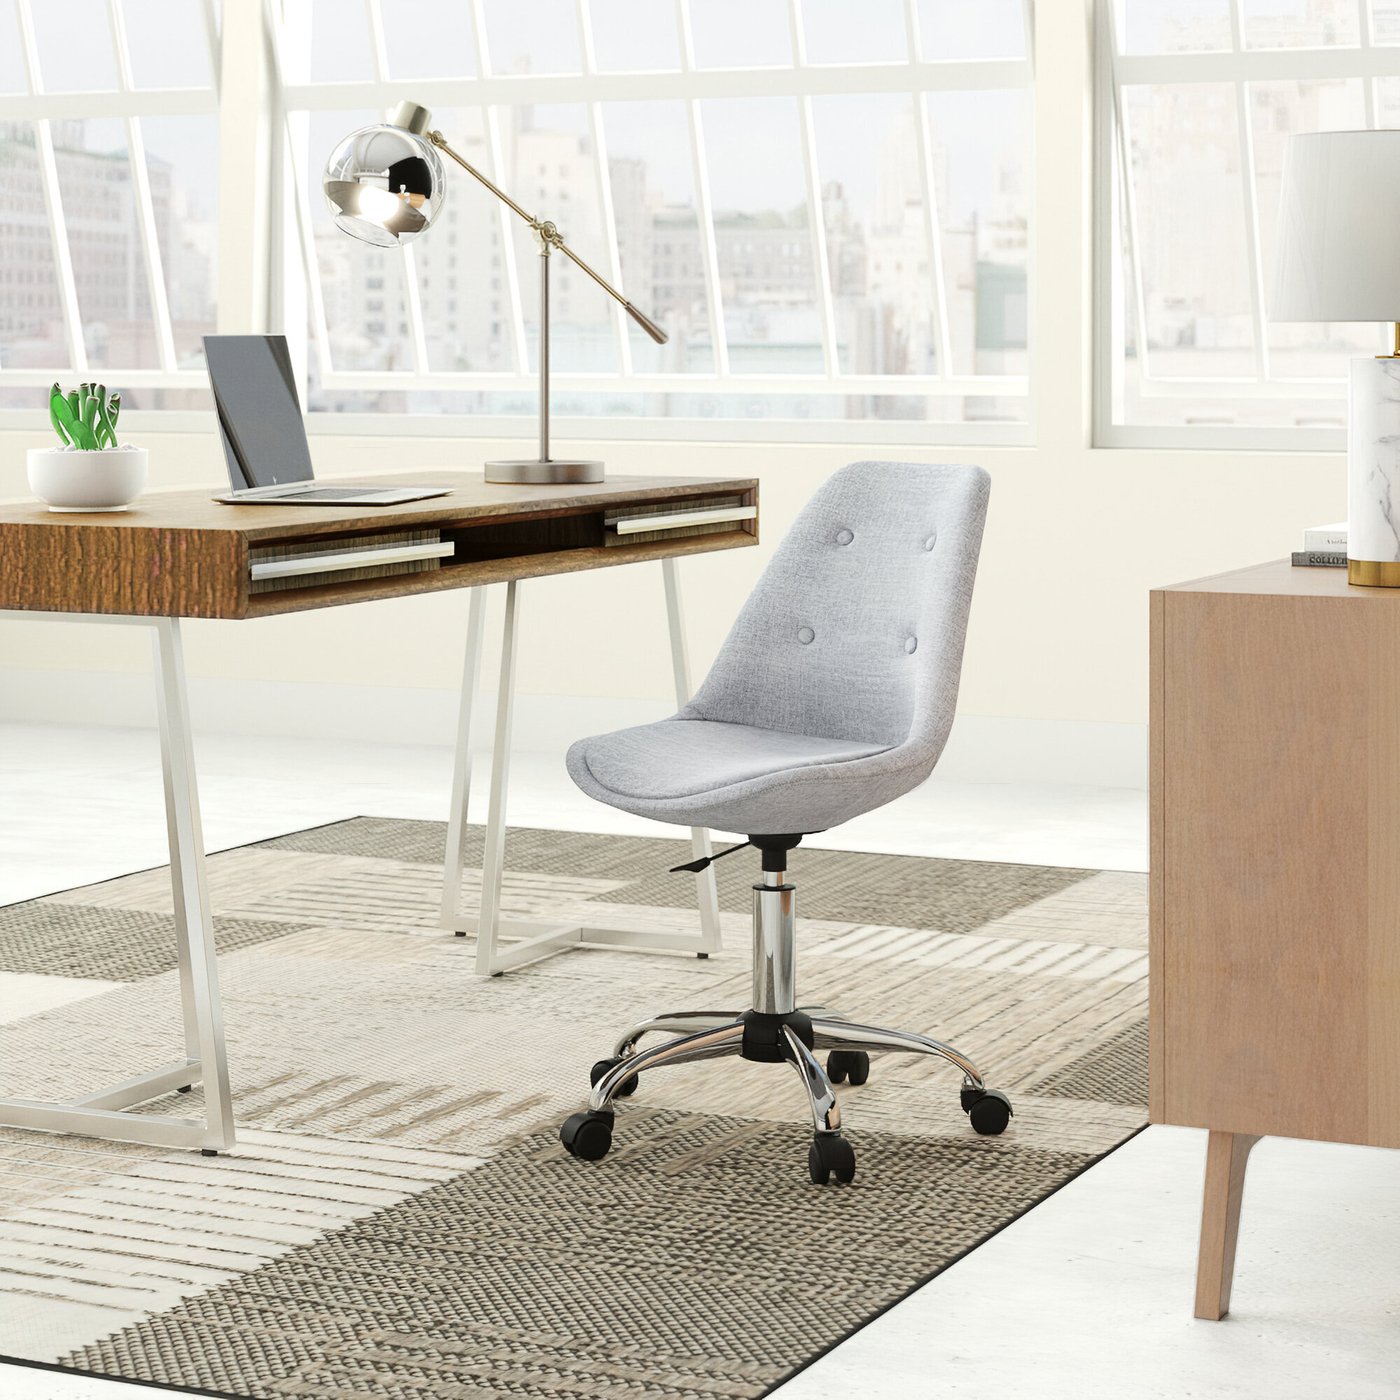 Desk Chair Styles To Fit Your Space You'll Love in 2021 - VisualHunt